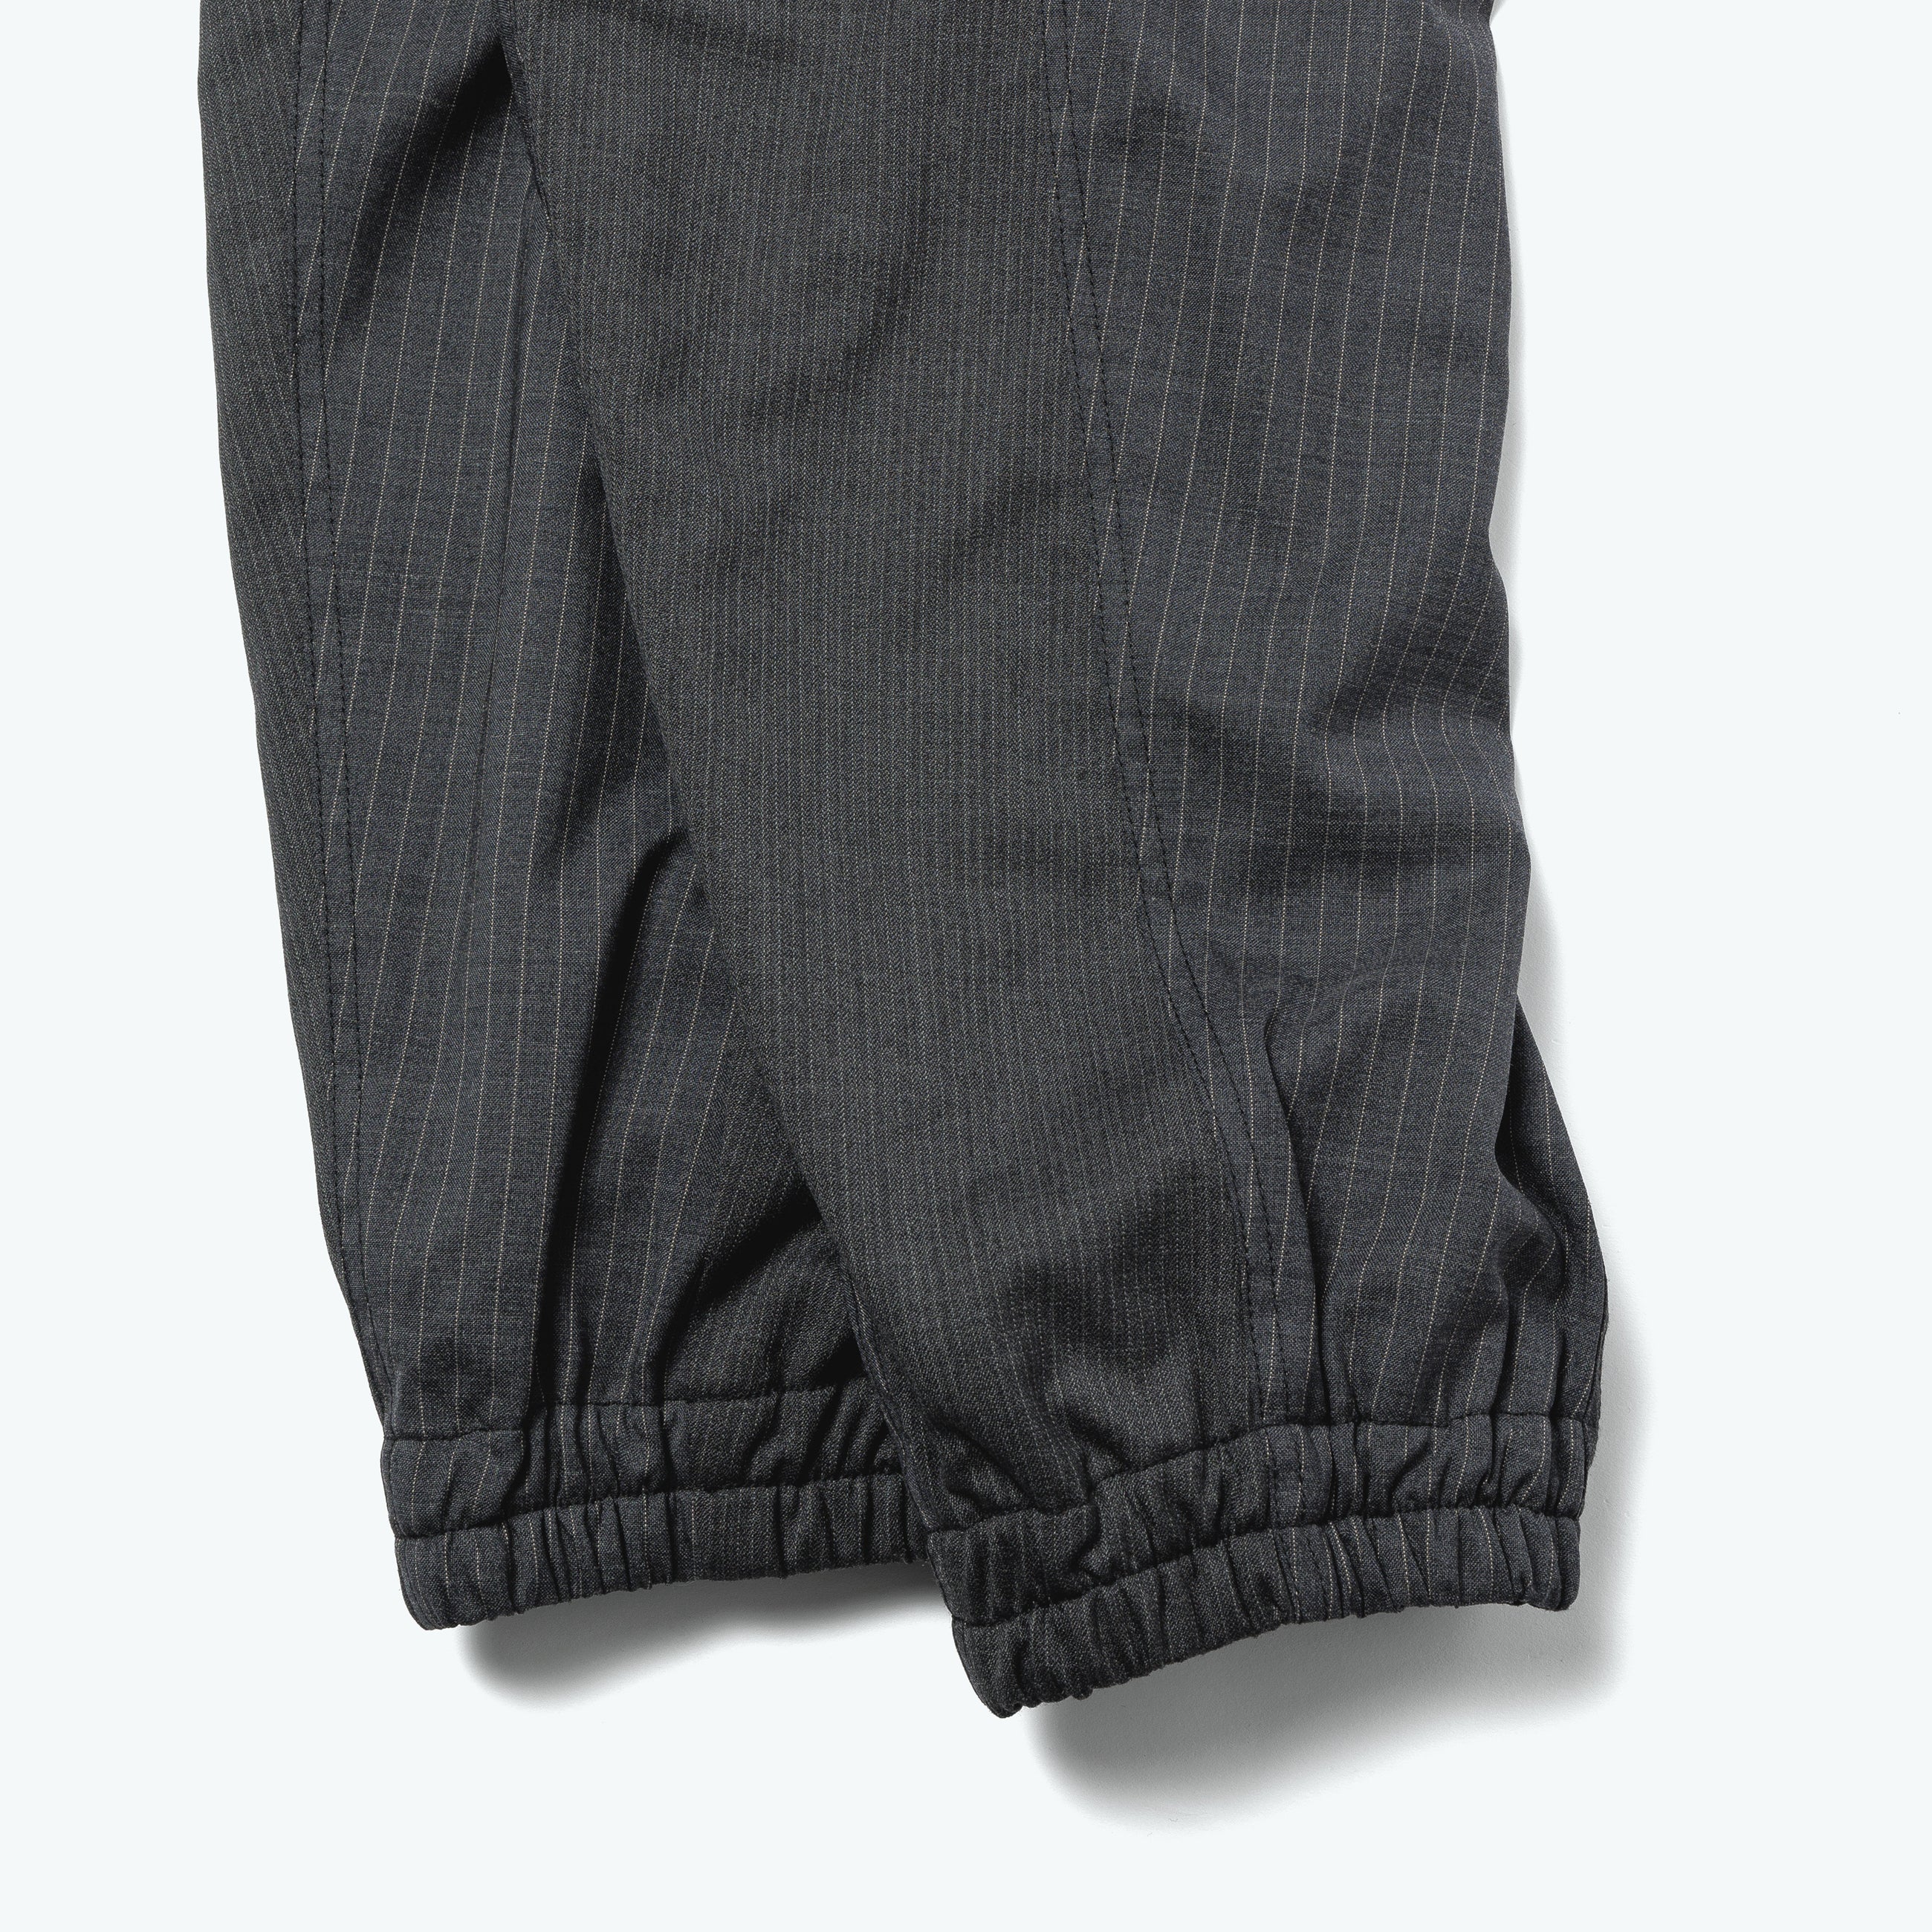 Striped combination cargo pants